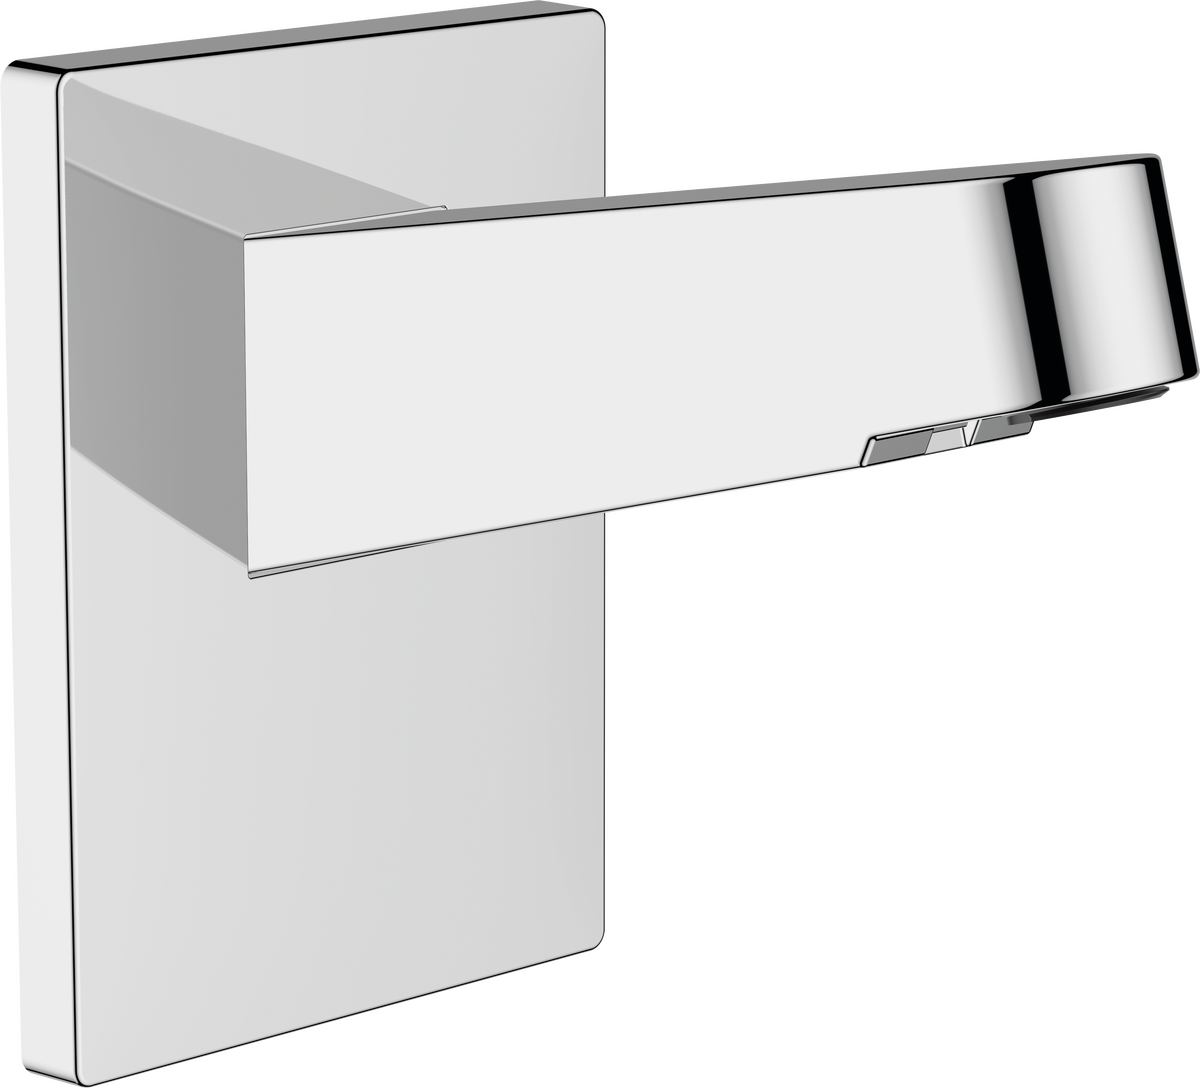 hansgrohe Pulsify E - Features 